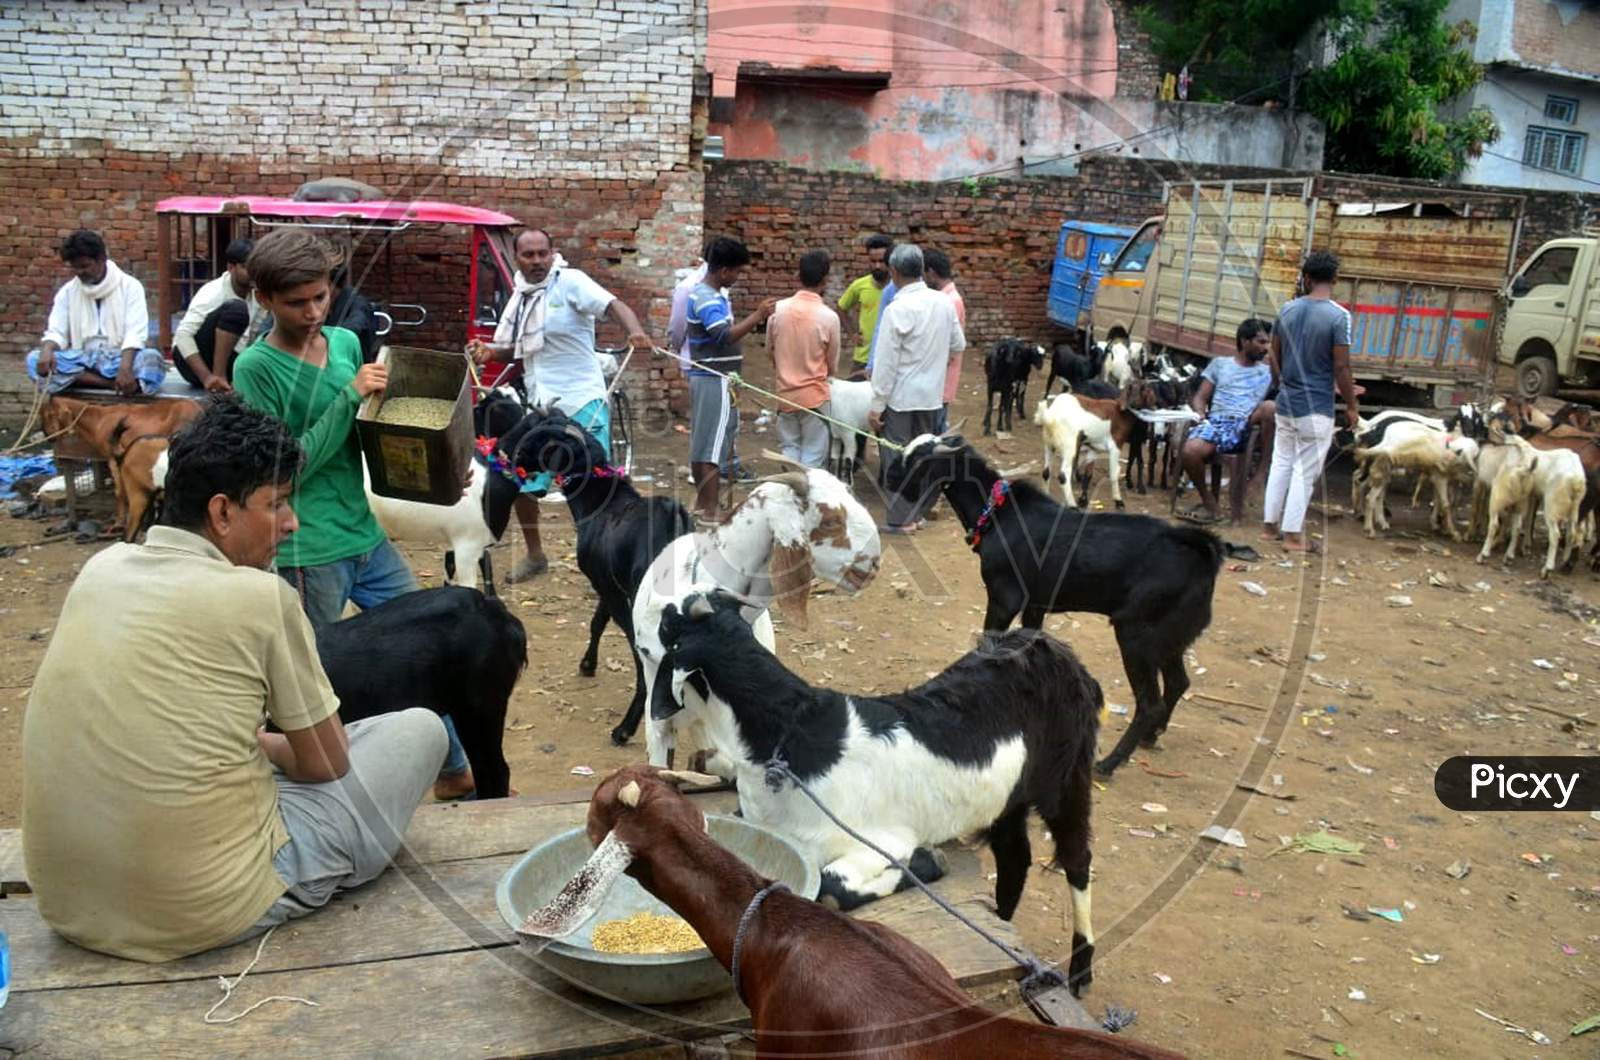 Vendor Waits For Customers To Sell Goats Ahead Of The Muslim Festival Of Eid Al-Adha At A Market In Prayagraj, July 28, 2020.